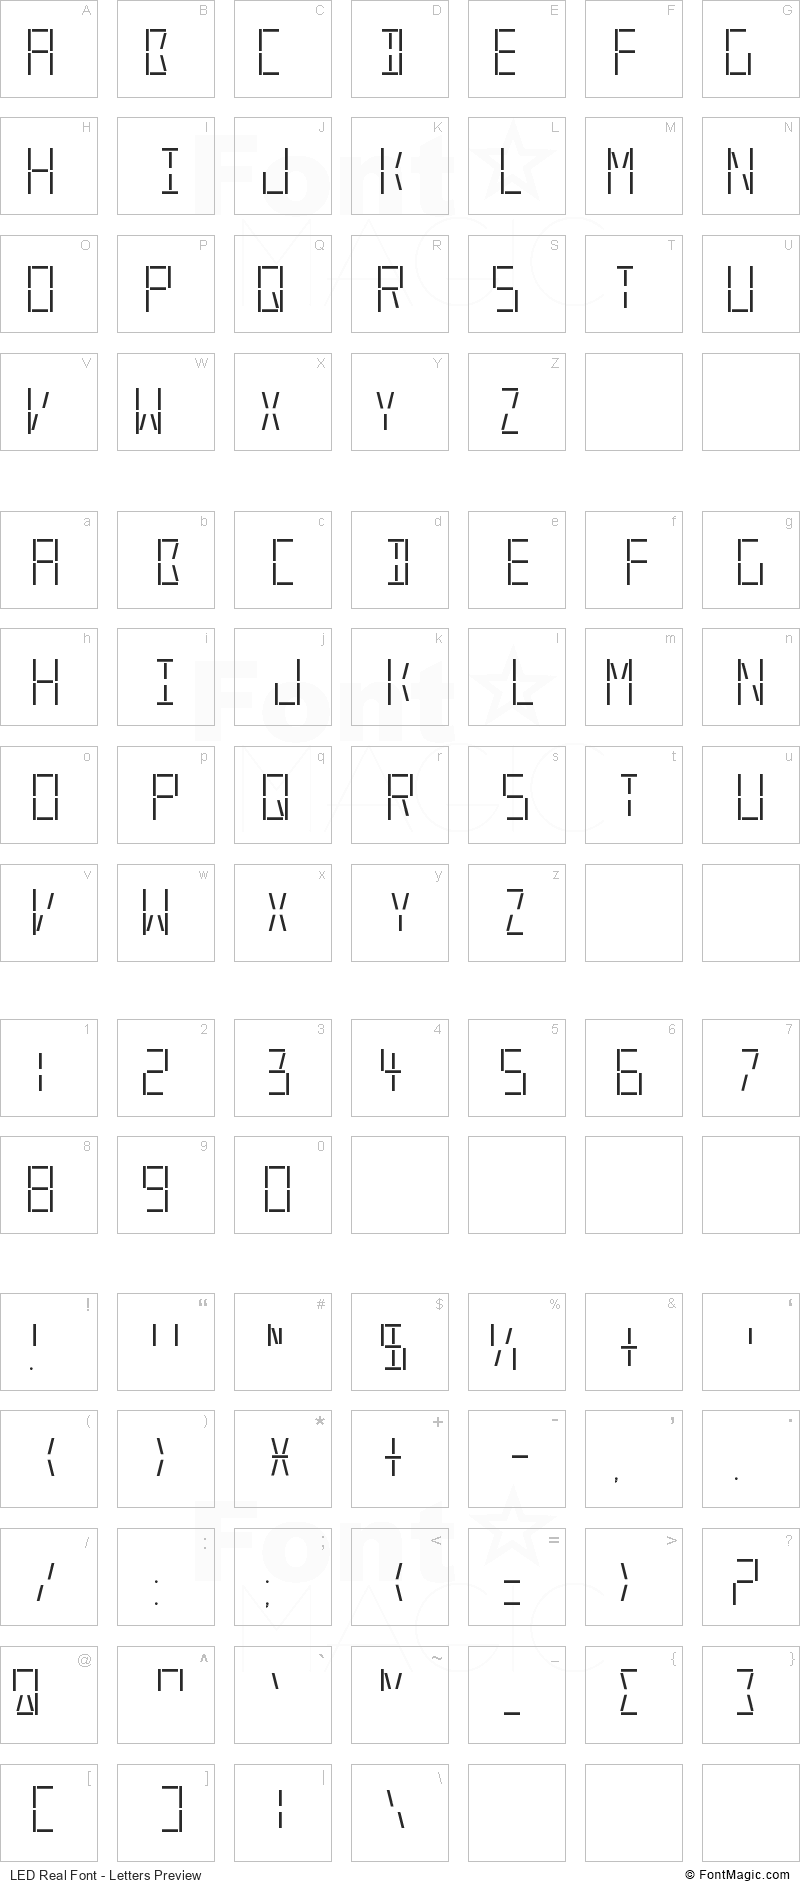 LED Real Font - All Latters Preview Chart